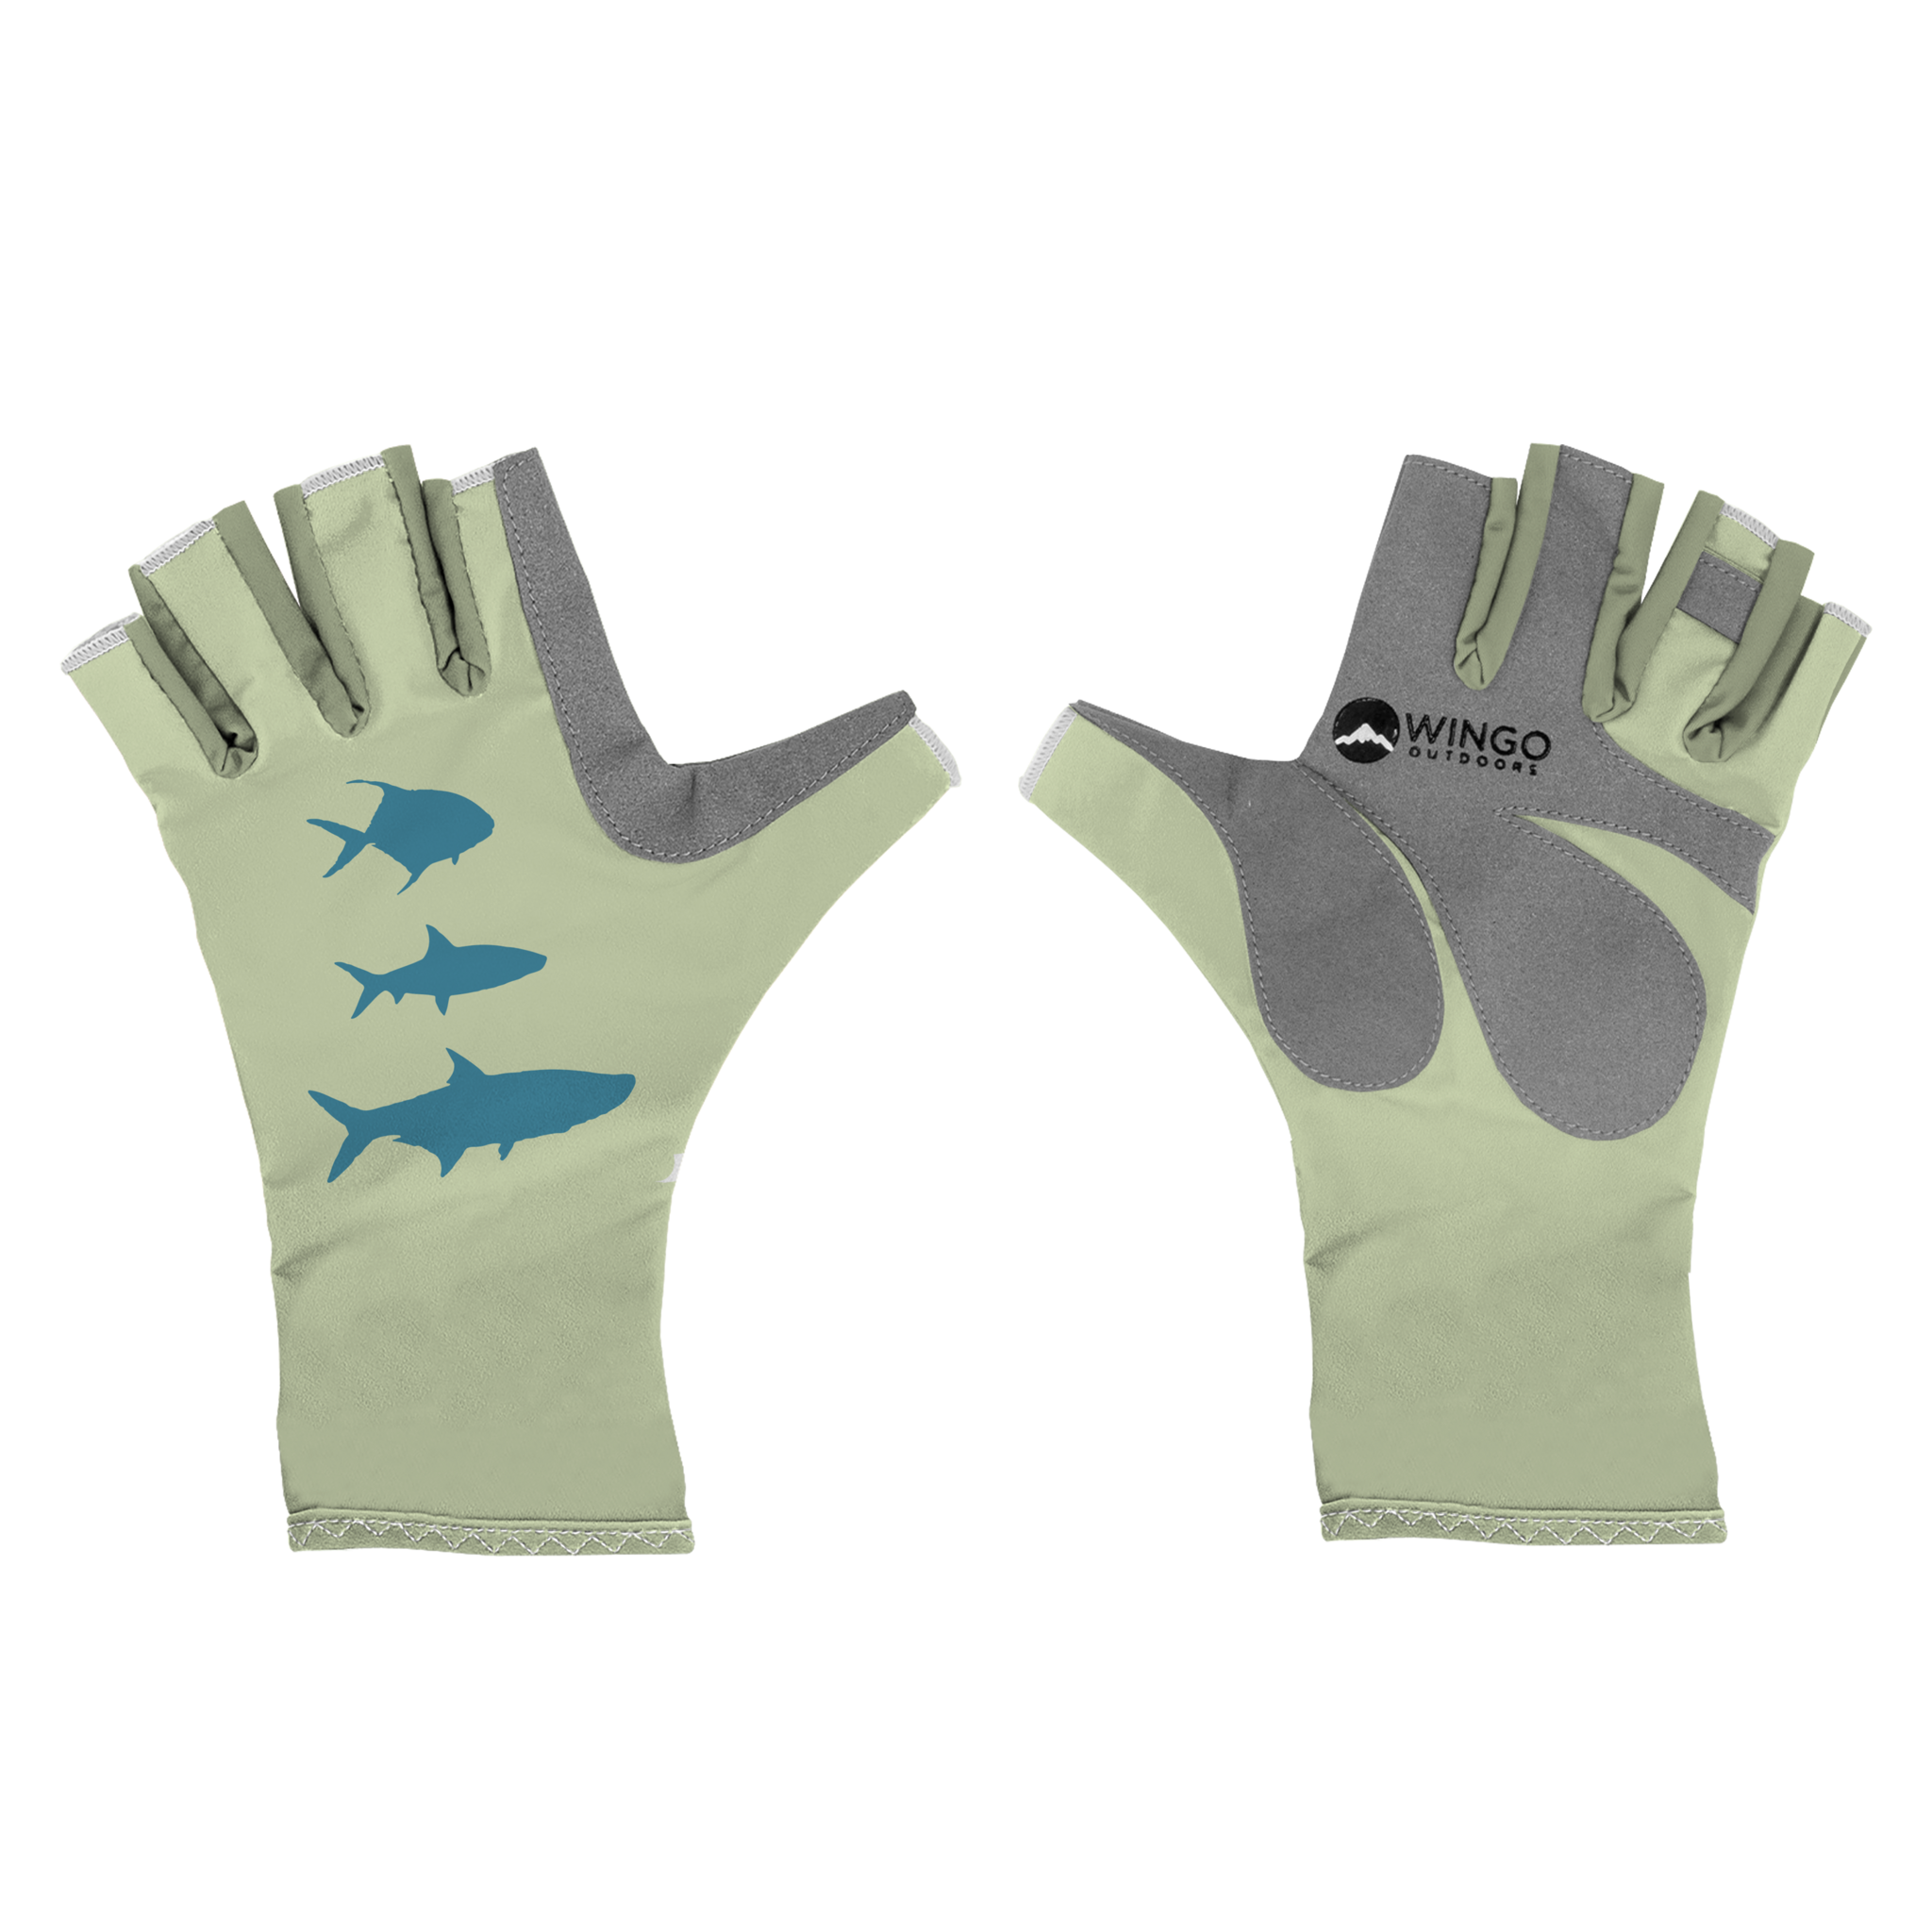 2022 Simms Fishing Gloves - A Detailed Review 